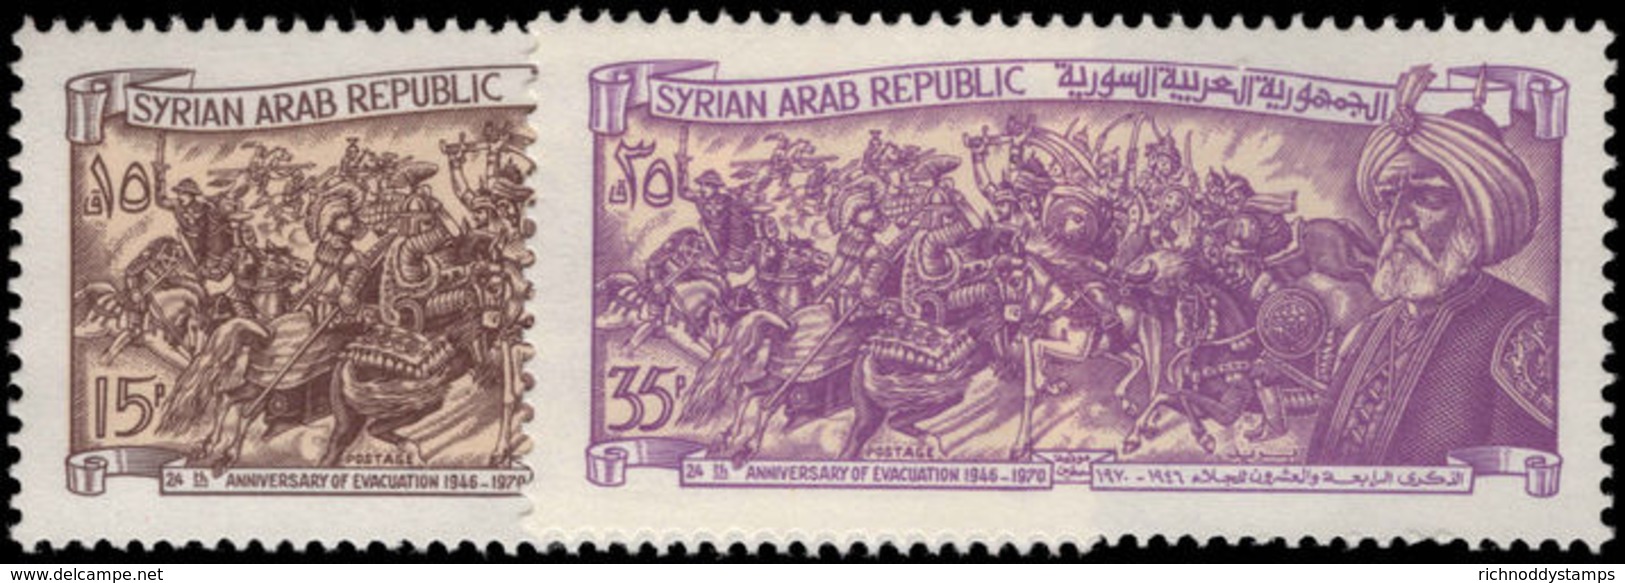 Syria 1970 Evacuation Of Foreign Troops Unmounted Mint. - Syria